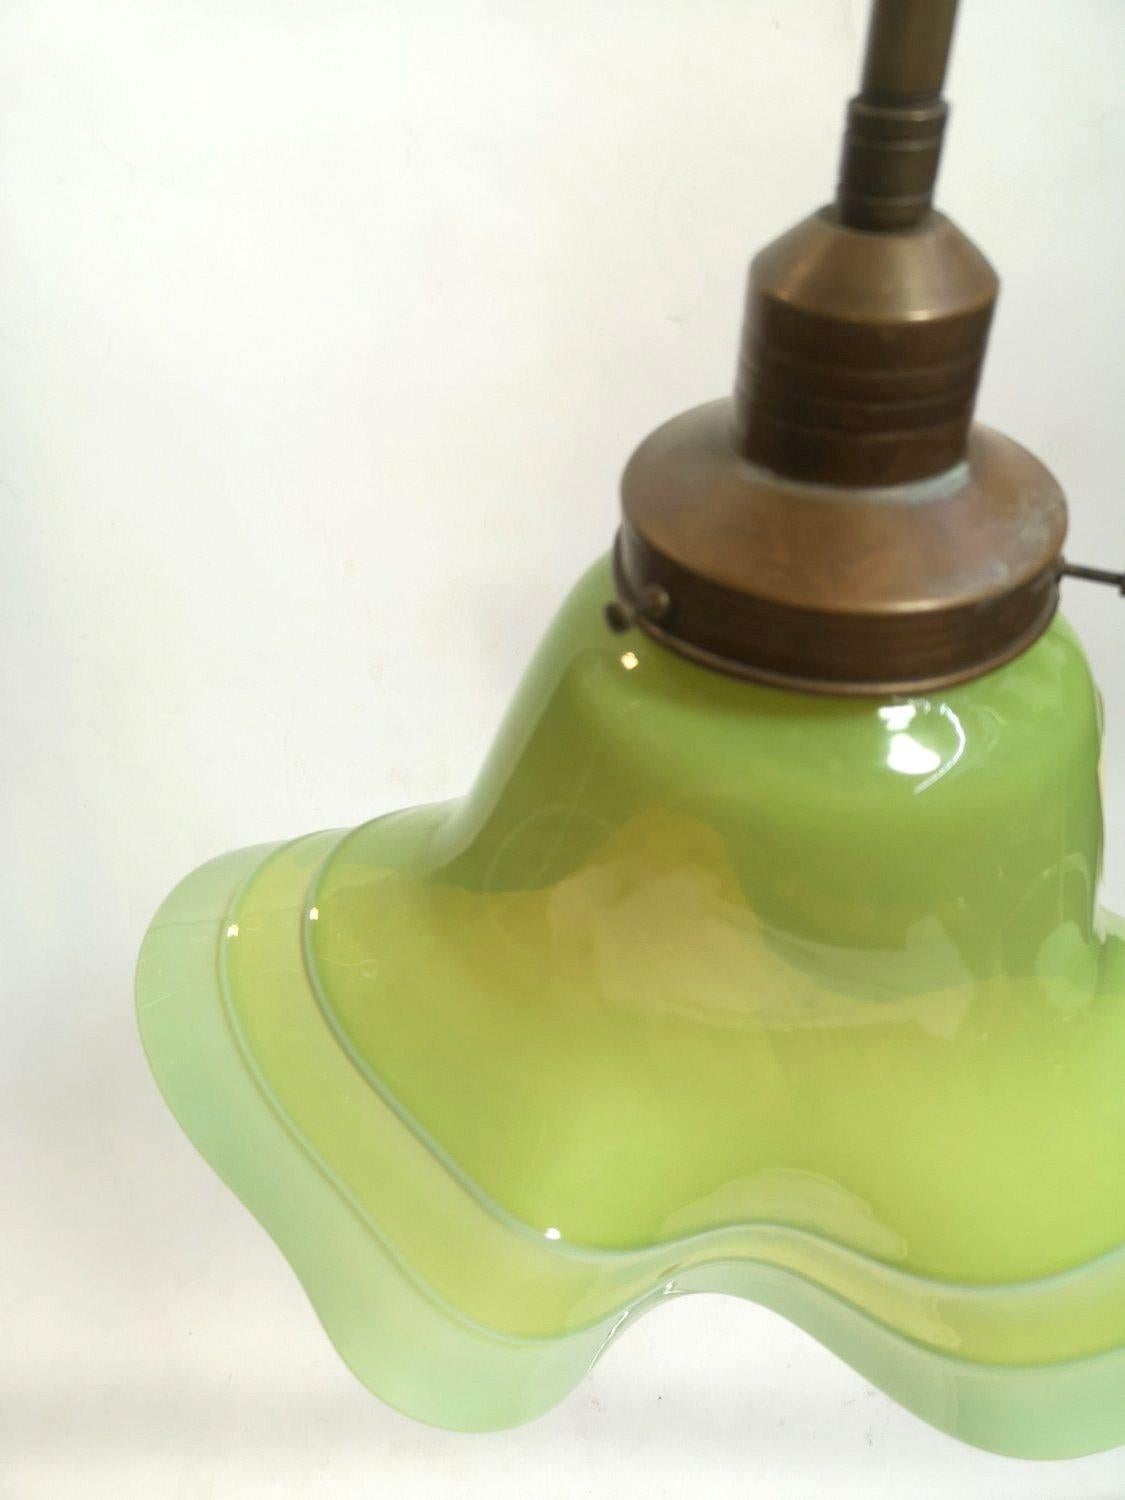 European Art Nouveau lamp pendant with a green glass shade by Márton Horváth For Sale